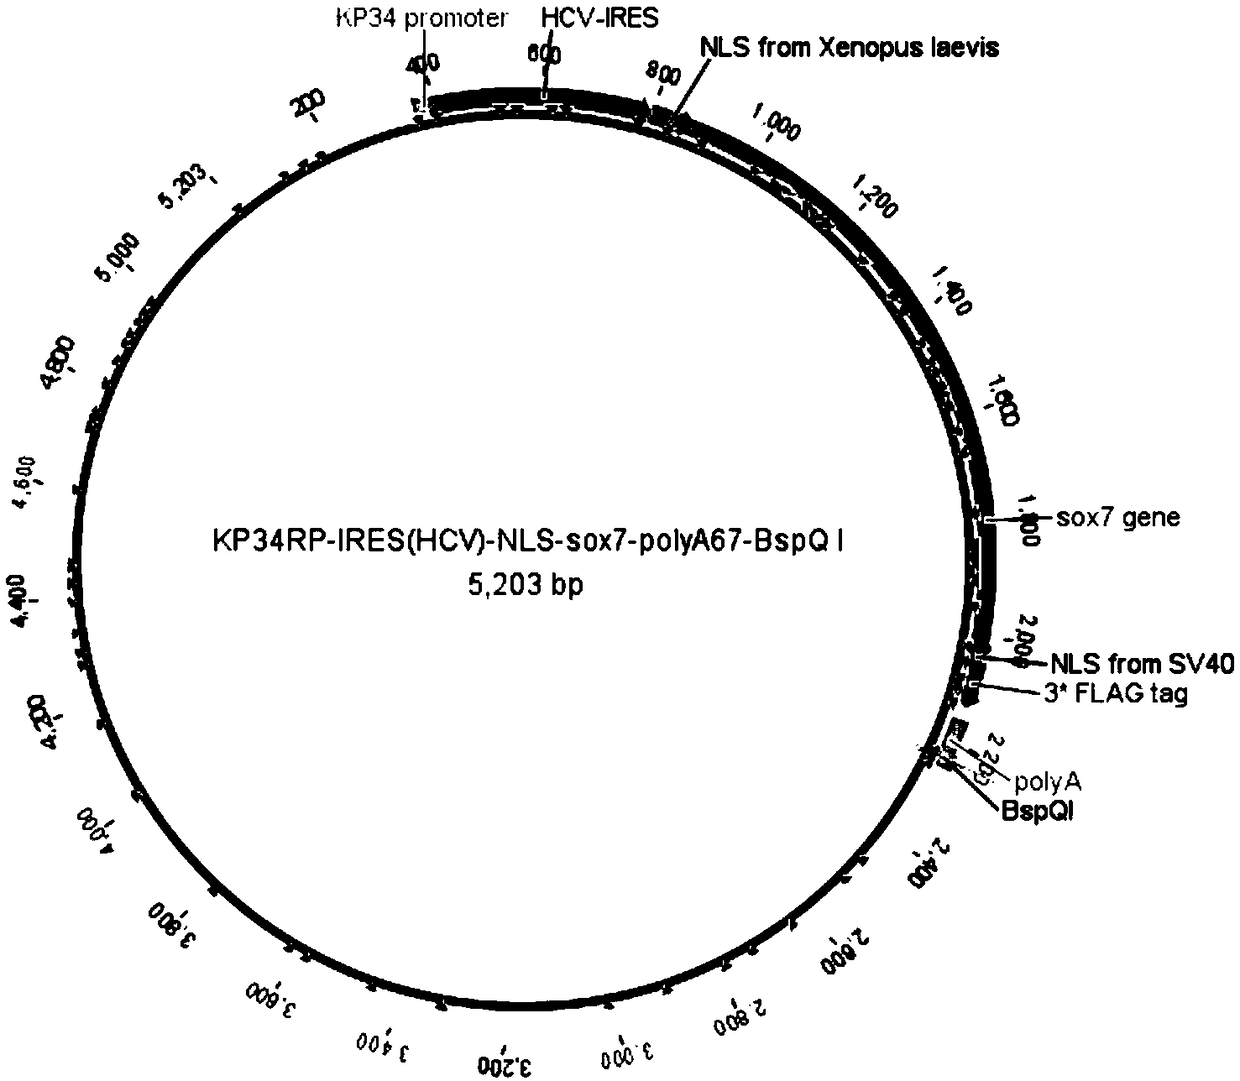 Production application of mono-subunit RNA polymerase KP34RP in long-chain mRNA synthesis